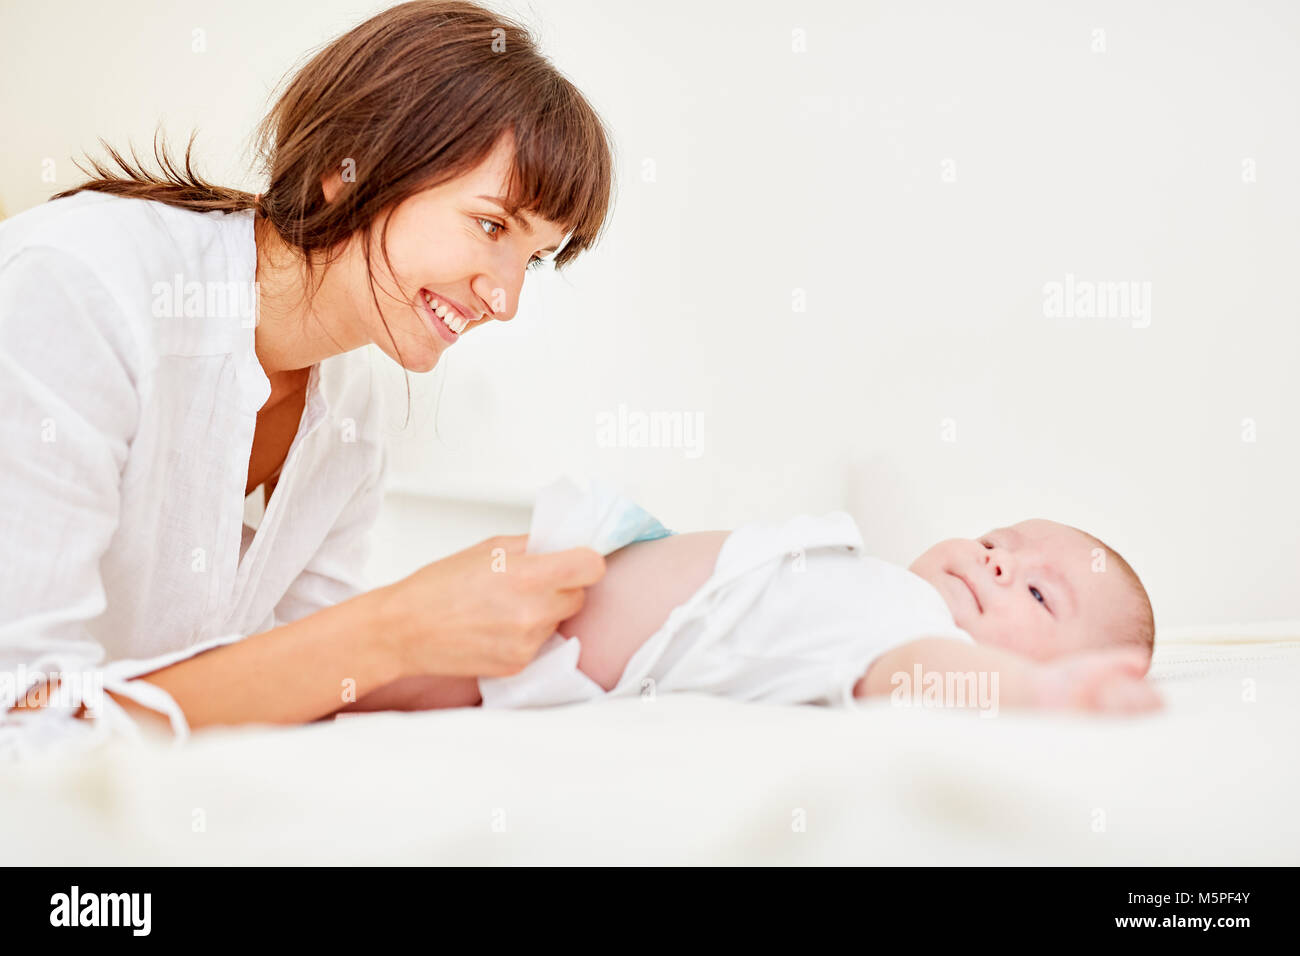 Smiling mother changes the diapers with her newborn baby Stock Photo